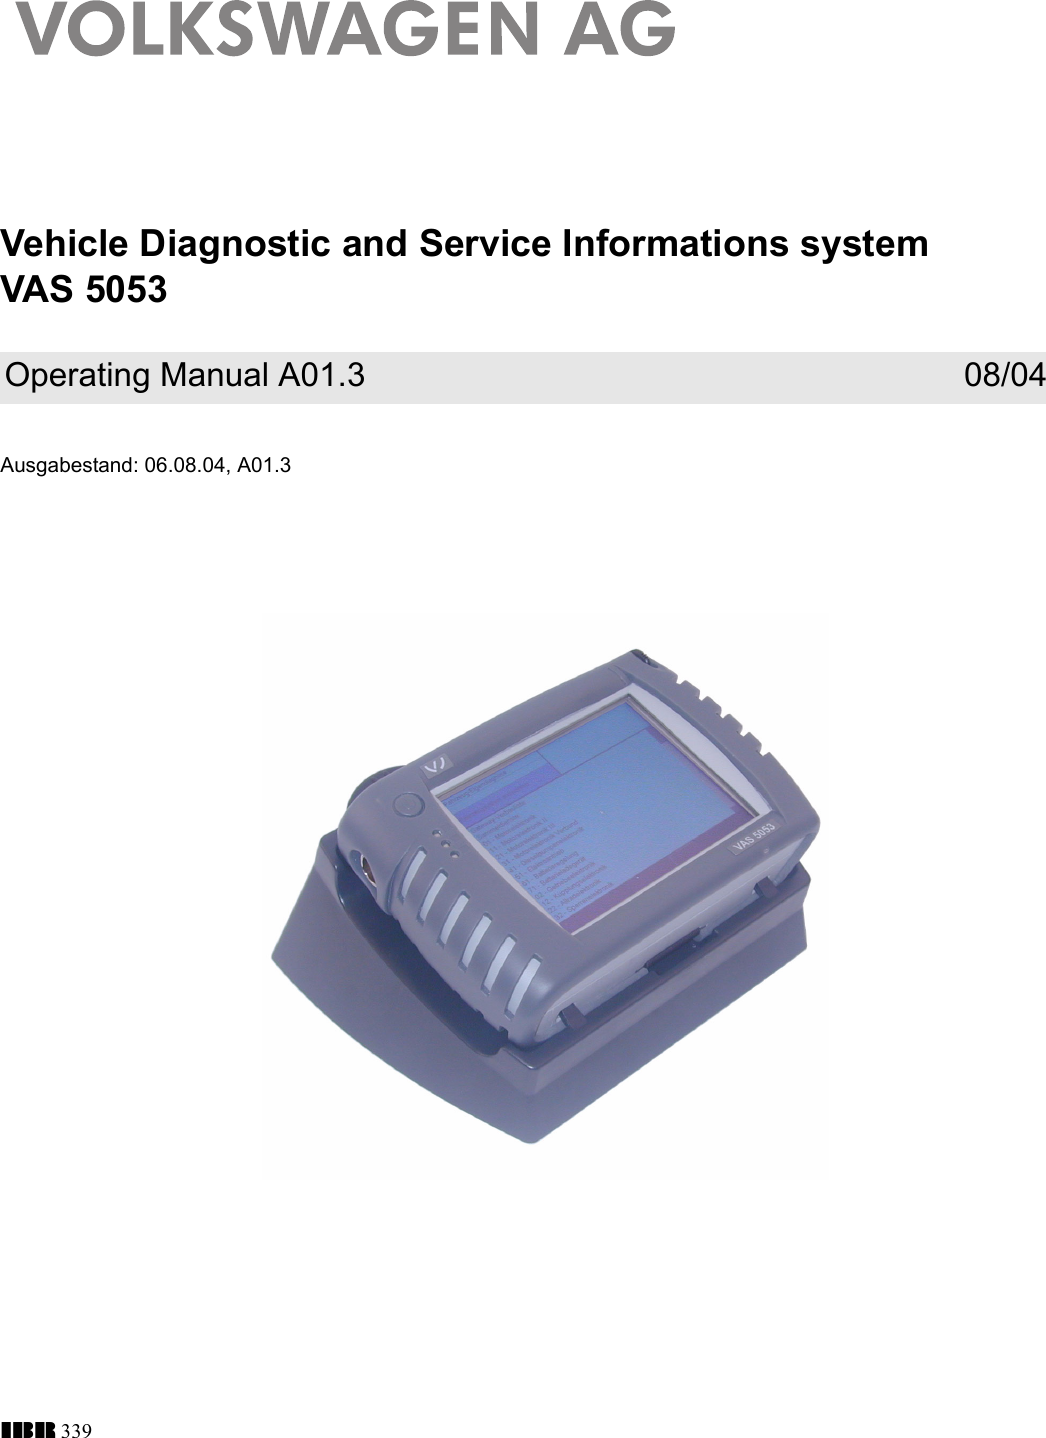 Vehicle Diagnostic and Service Informations systemVAS 5053Ausgabestand: 06.08.04, A01.3Operating Manual A01.3 08/04IBR 339